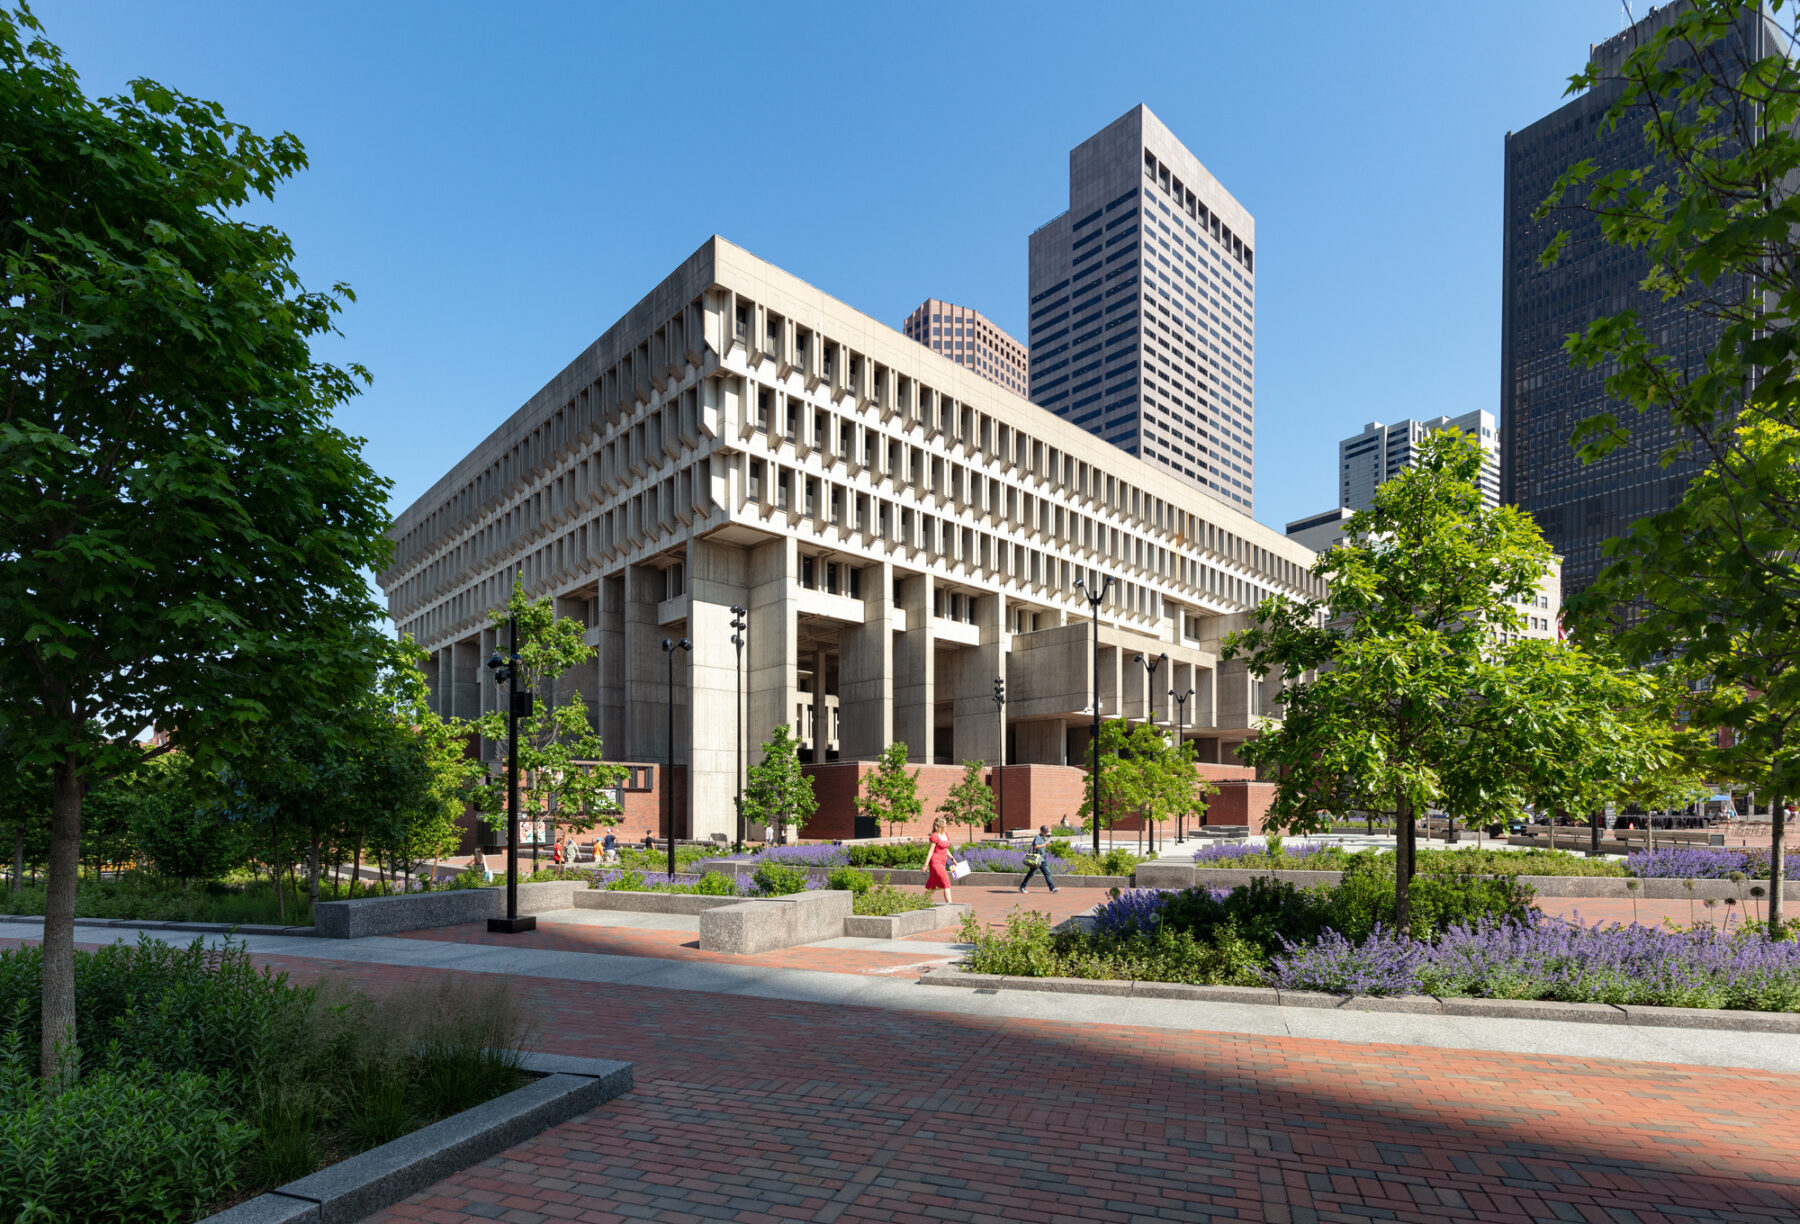 exterior photo of boston city hall plaza landscape with building in background, people walking through the space